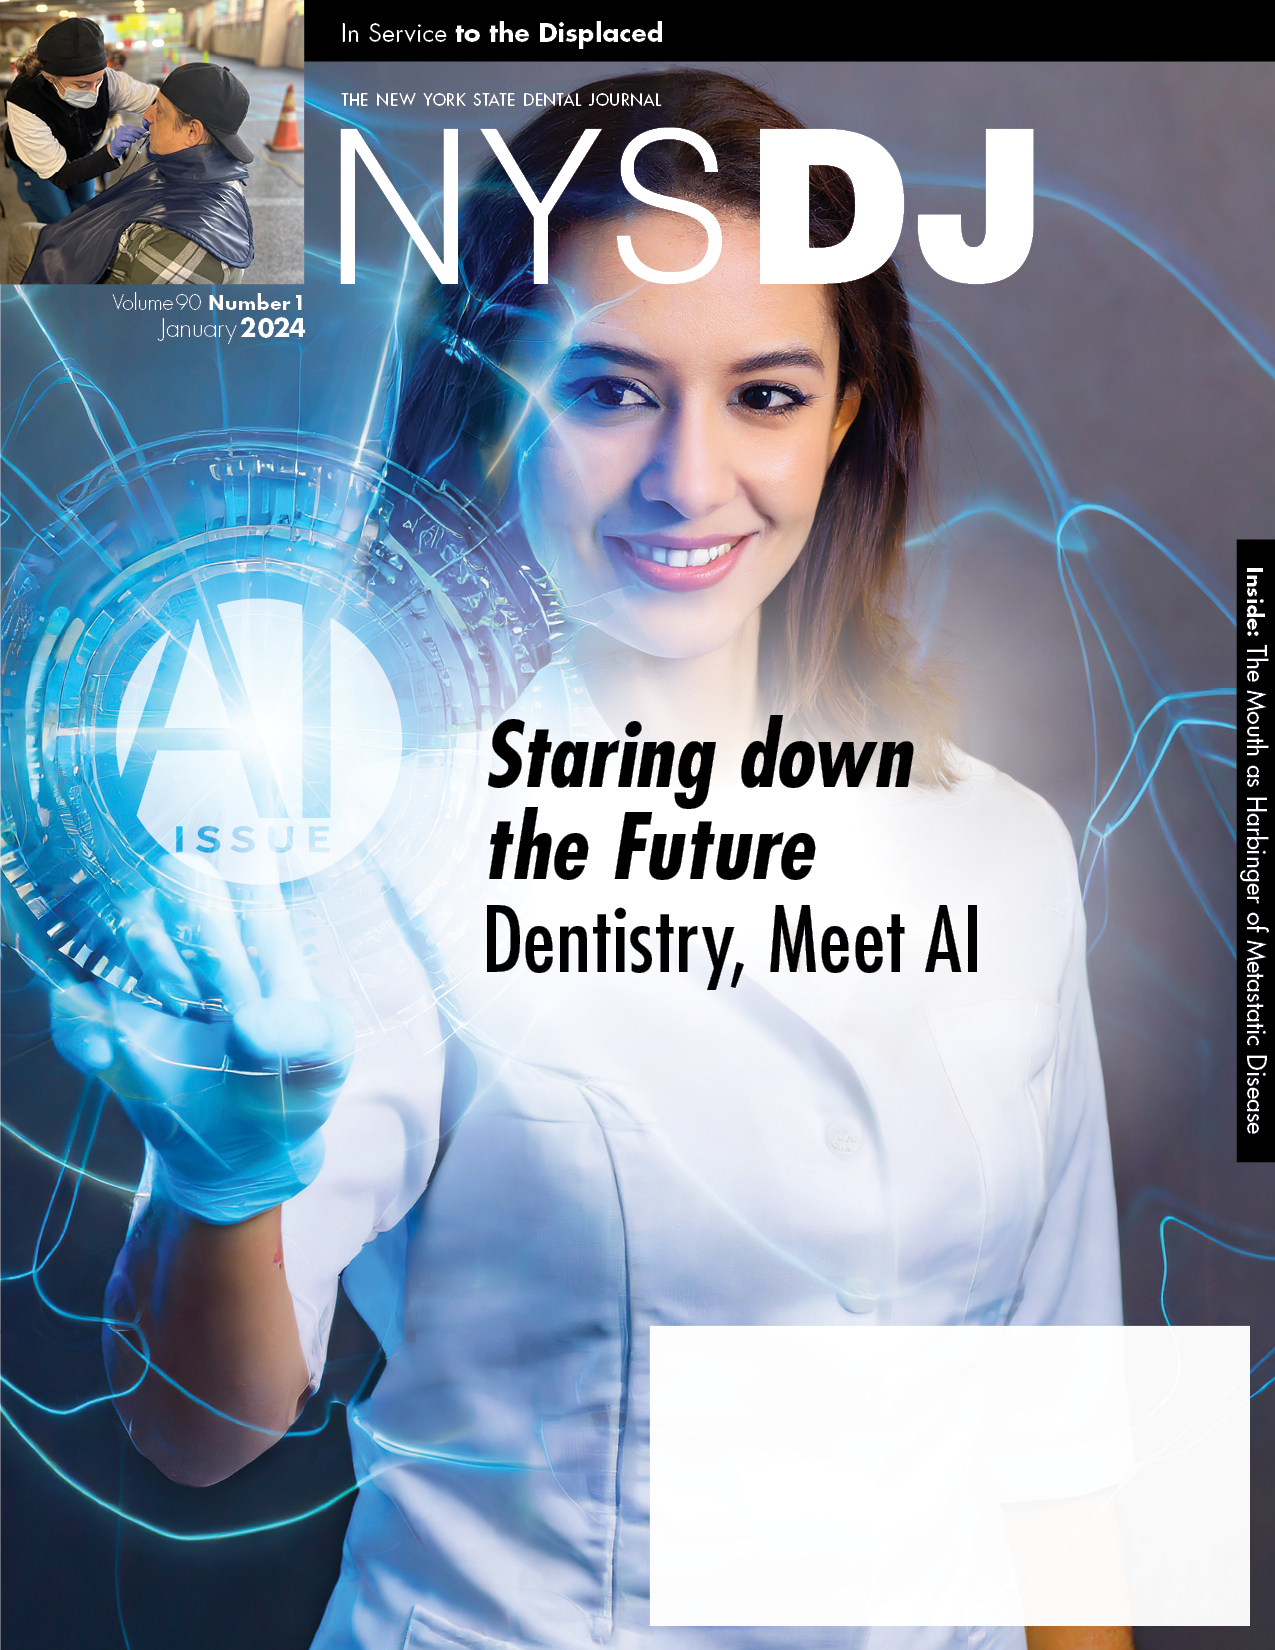 Cover of the NYSDJ with a smiling person in a white coat and nitrile gloves touching a glowing, digital AI button with electricity coming out of it.